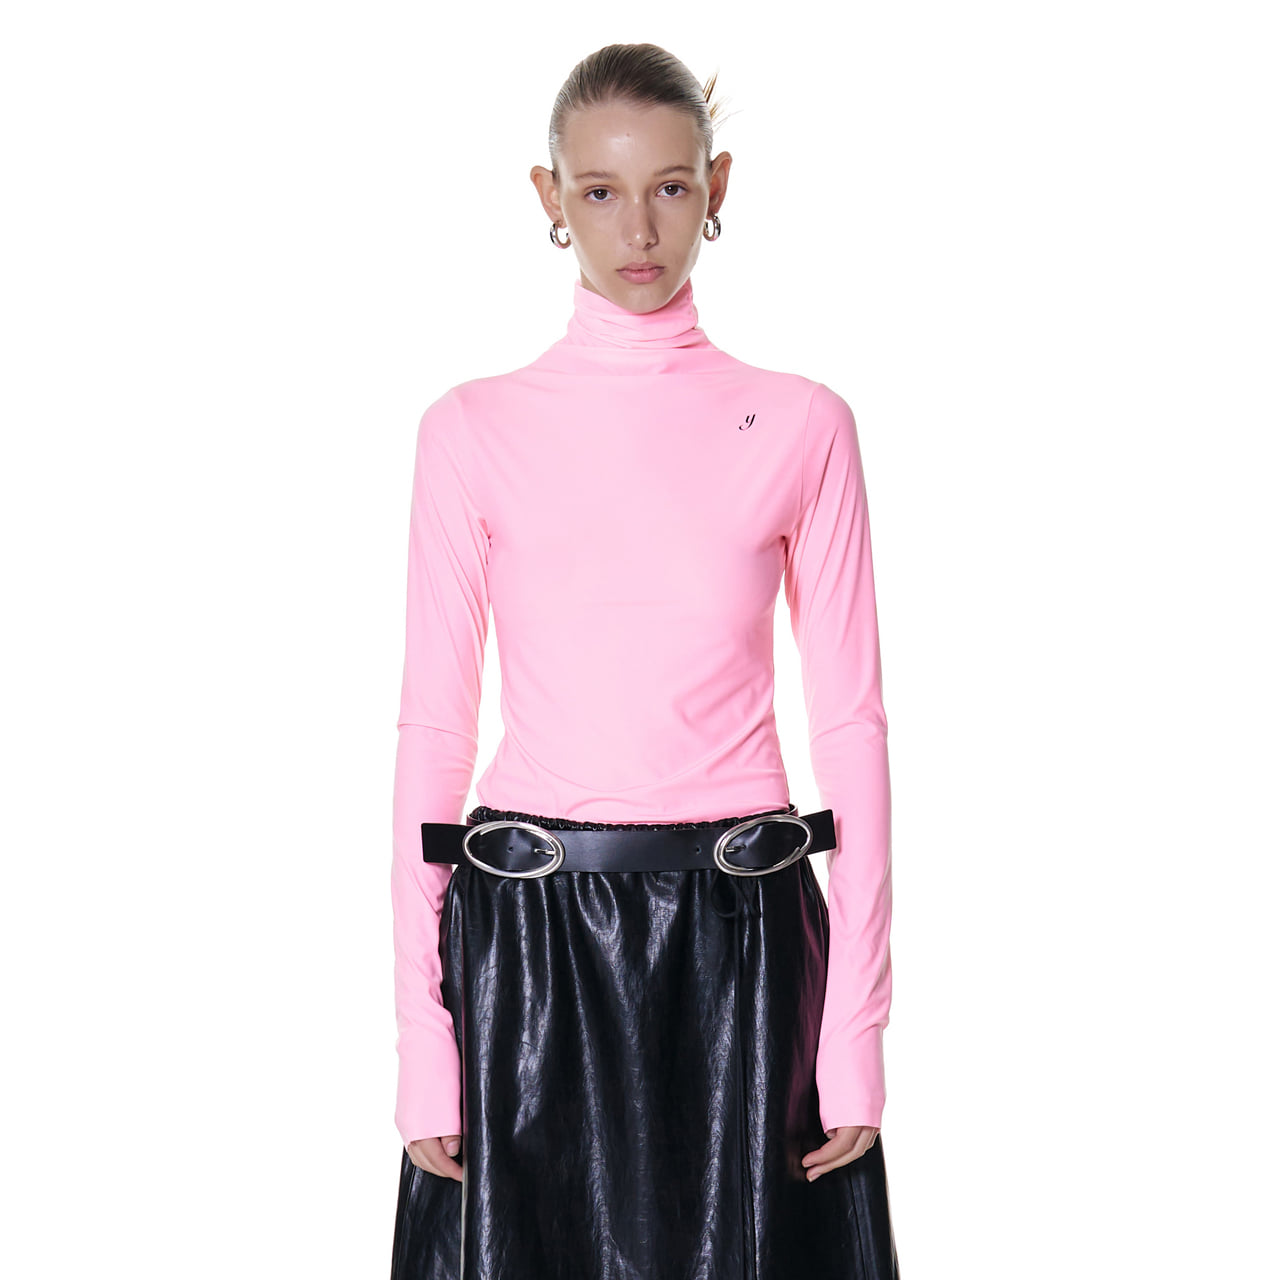 Basic Jersey Turtle Neck Top (Pink)